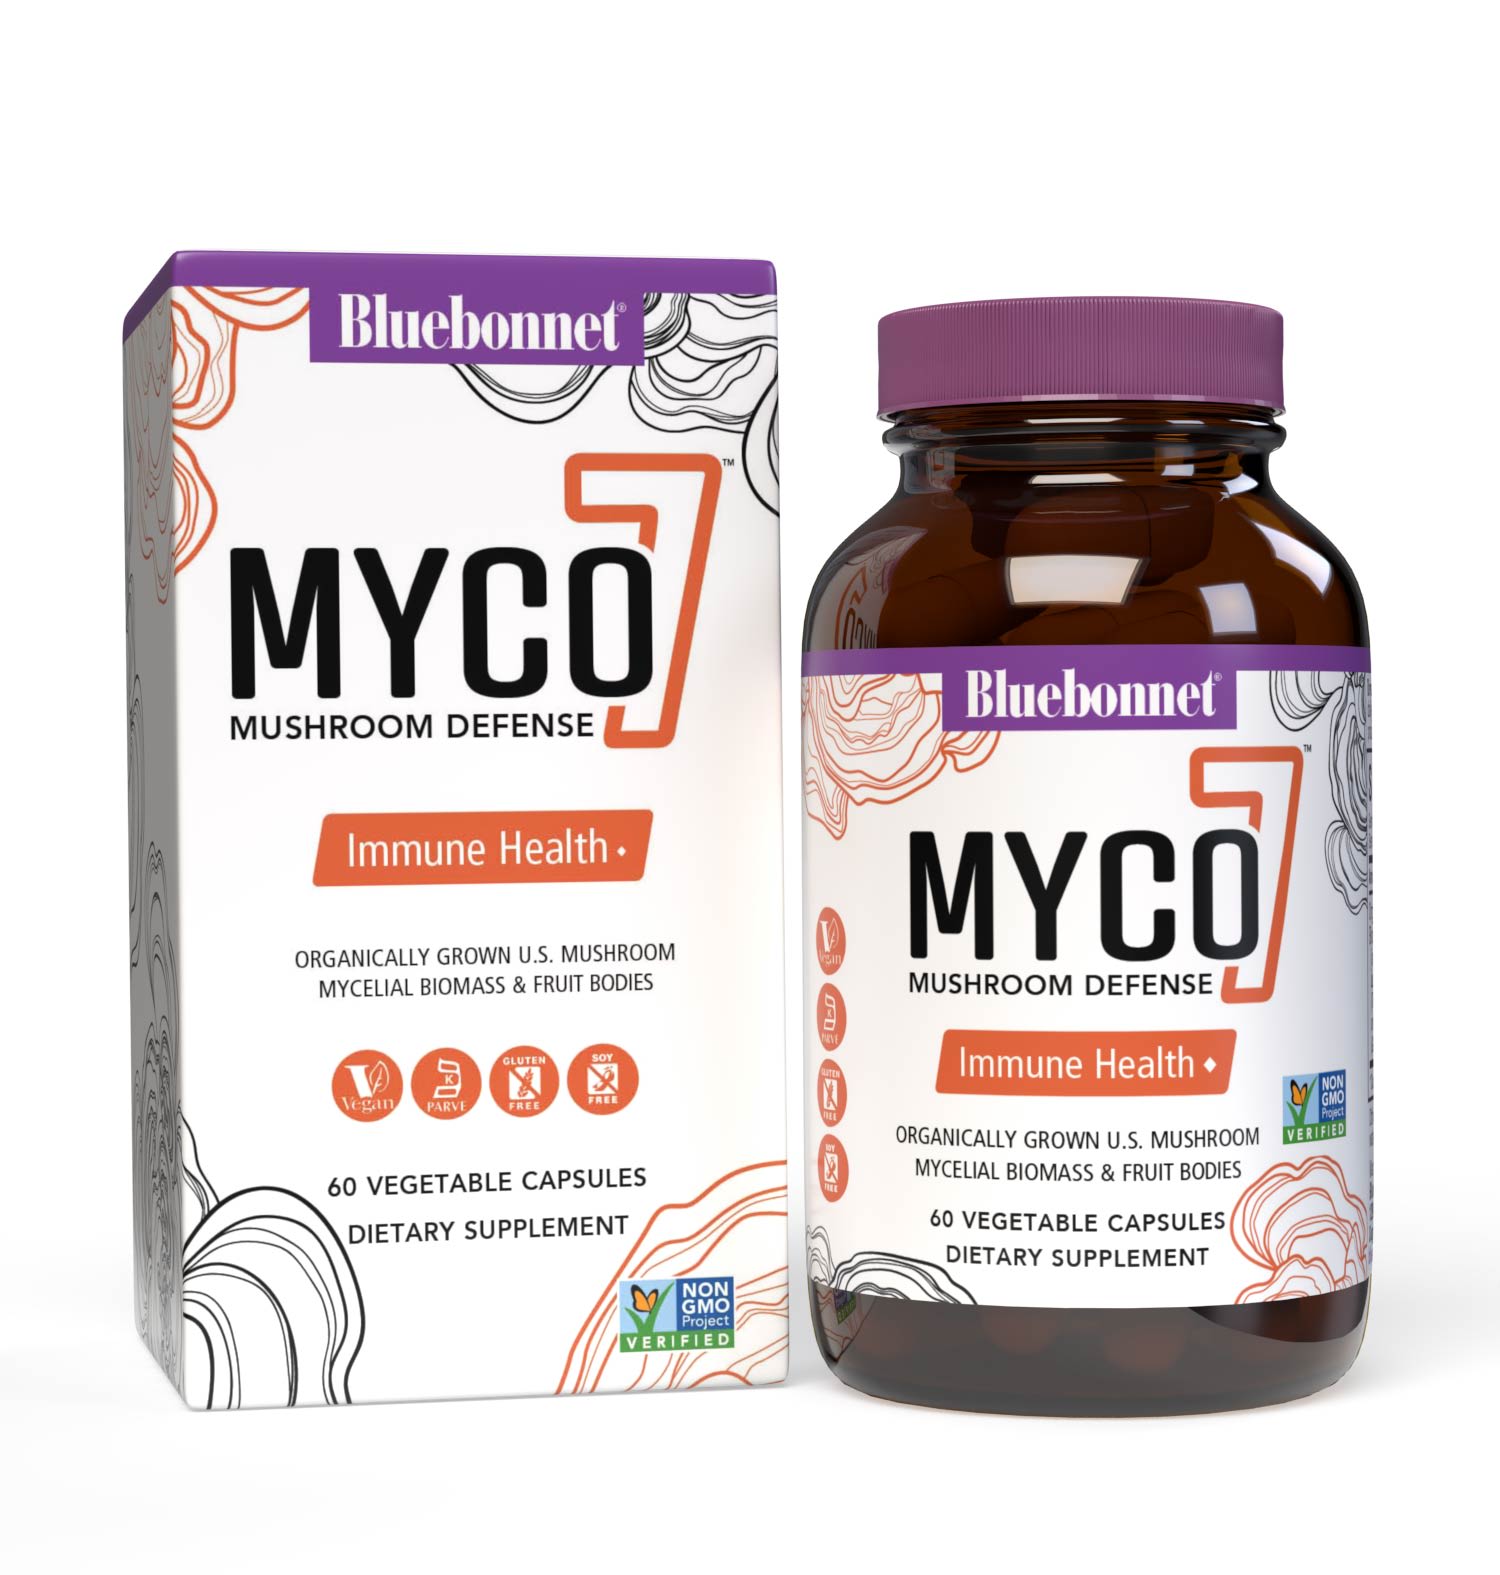 Bluebonnet’s Myco-7 Mushroom Defense Vegetable Capsules are formulated with seven organically grown, whole, full-cycle, mushrooms that are cultivated using solid state fermentation that deliver both the mycelial biomass and fruit bodies to help support immune health, energy & vitality, and daily wellness. With box. #size_60 count